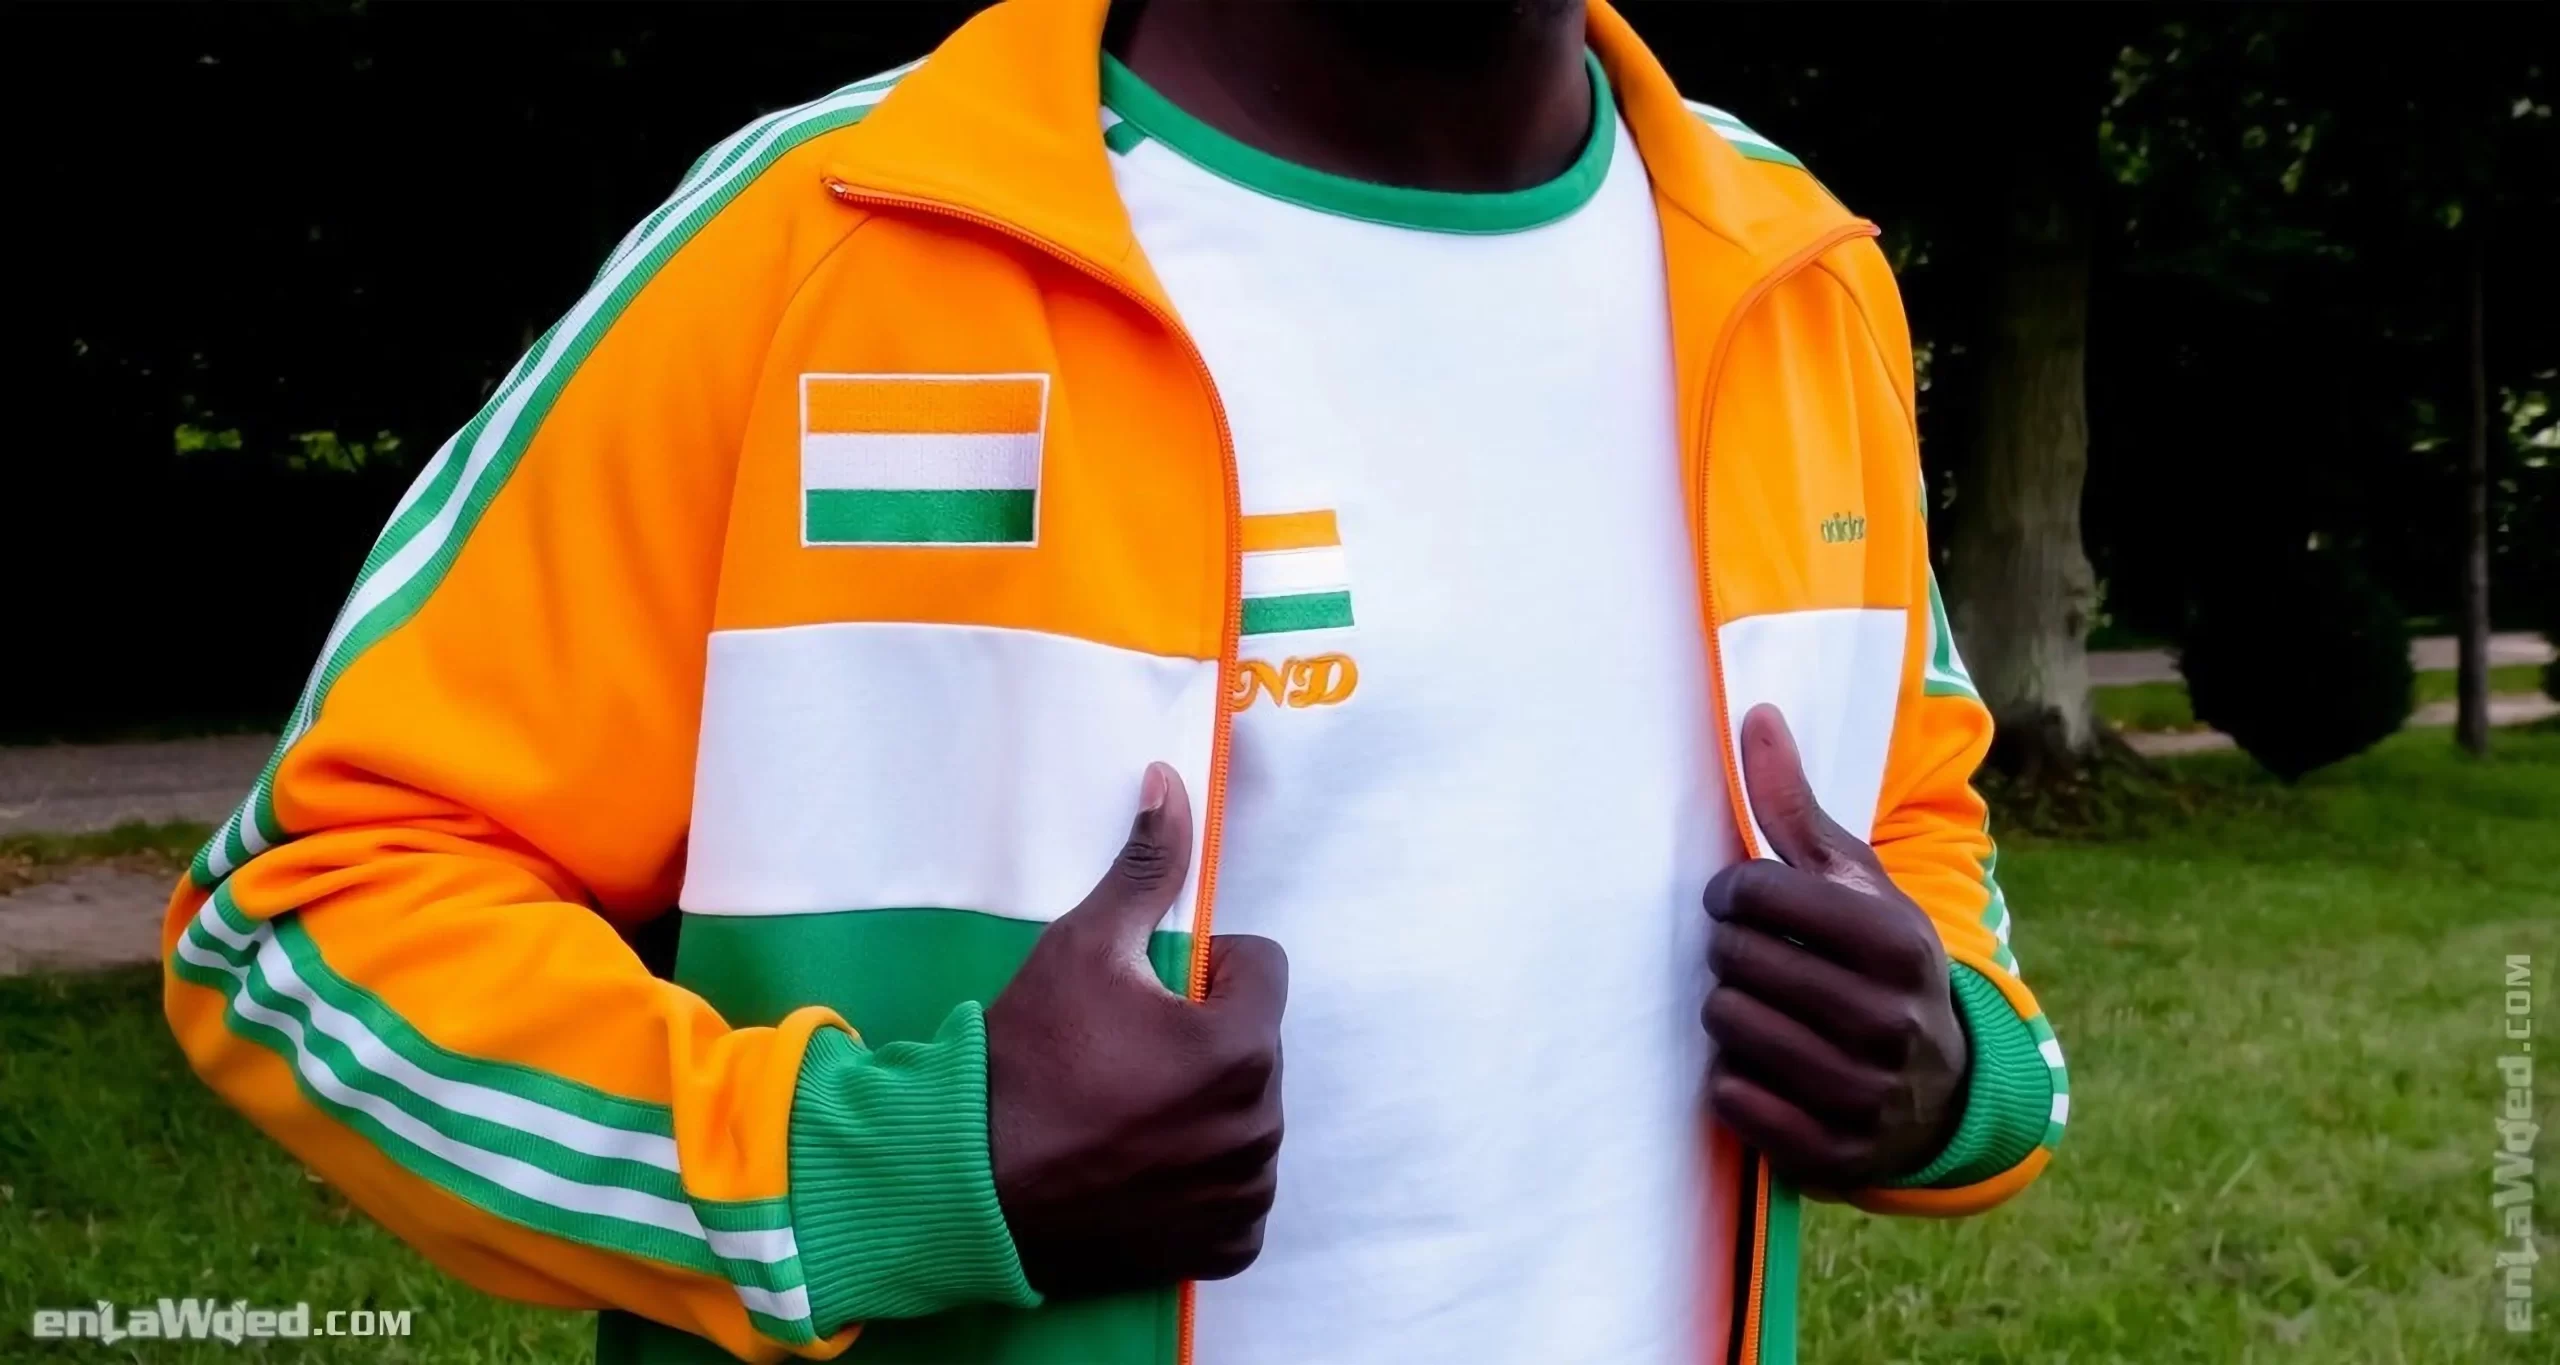 Men’s 2005 India Track Top by Adidas Originals: Jovial (EnLawded.com file #lmcfulw6e5jc6exhedh)